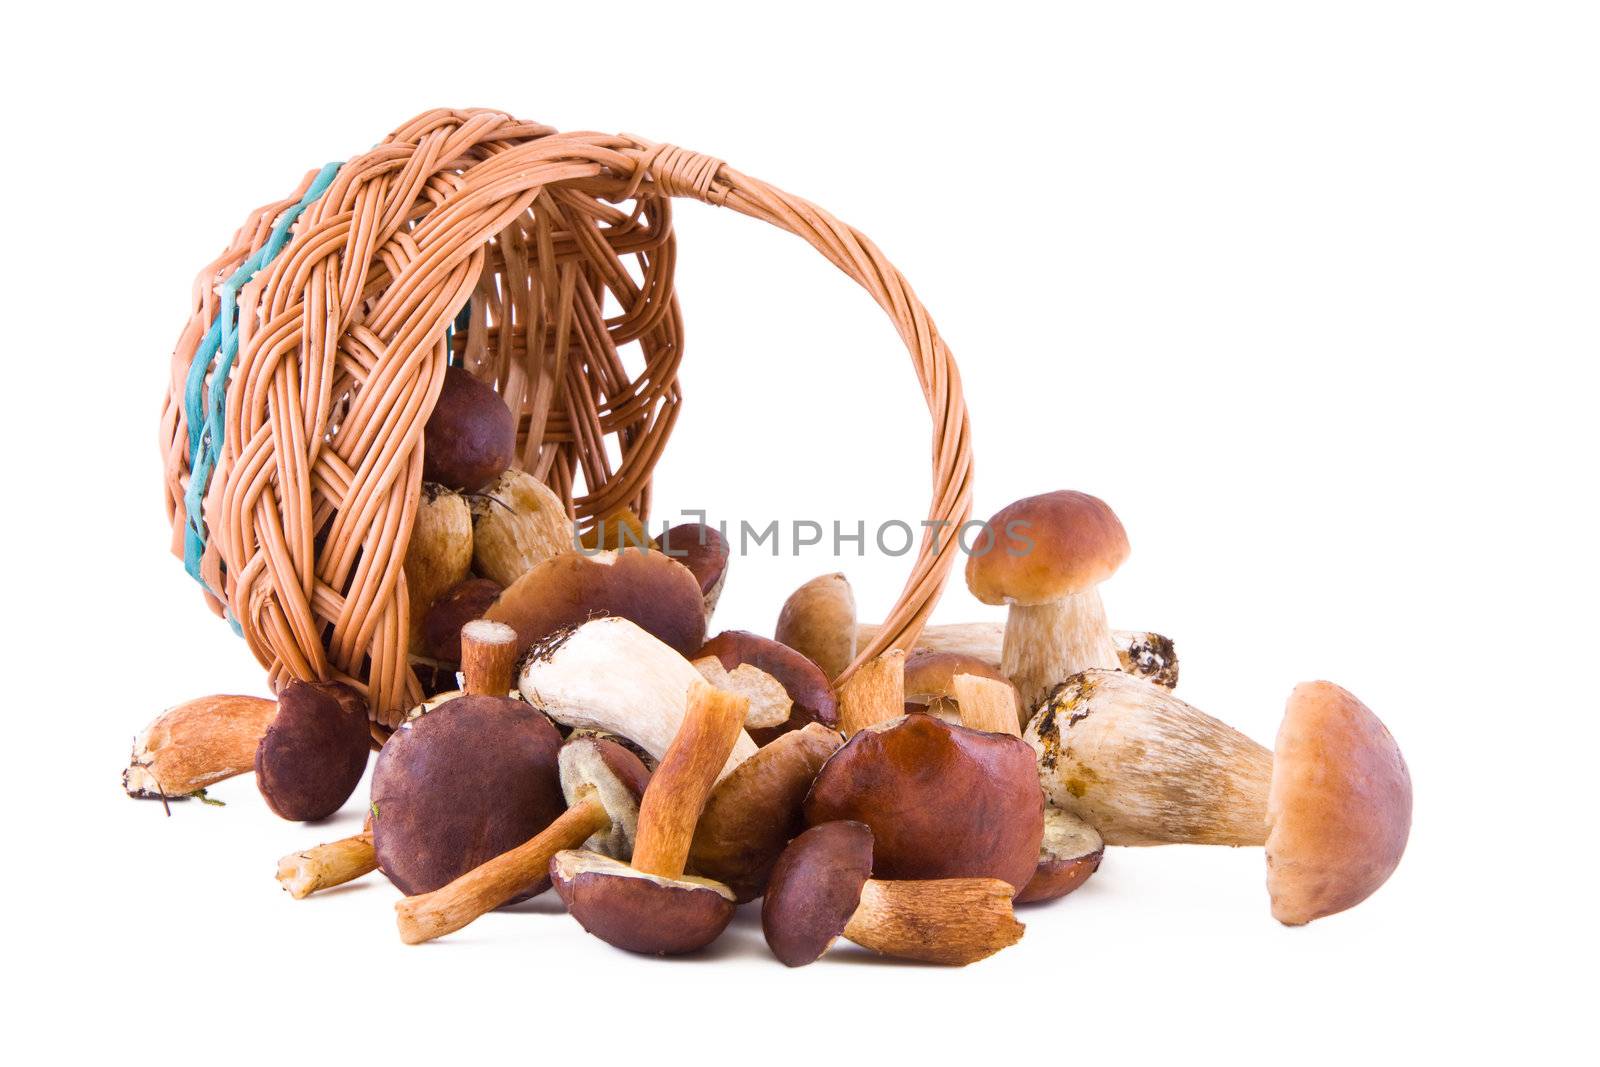 Boletus mushrooms with a wicker basket isolated